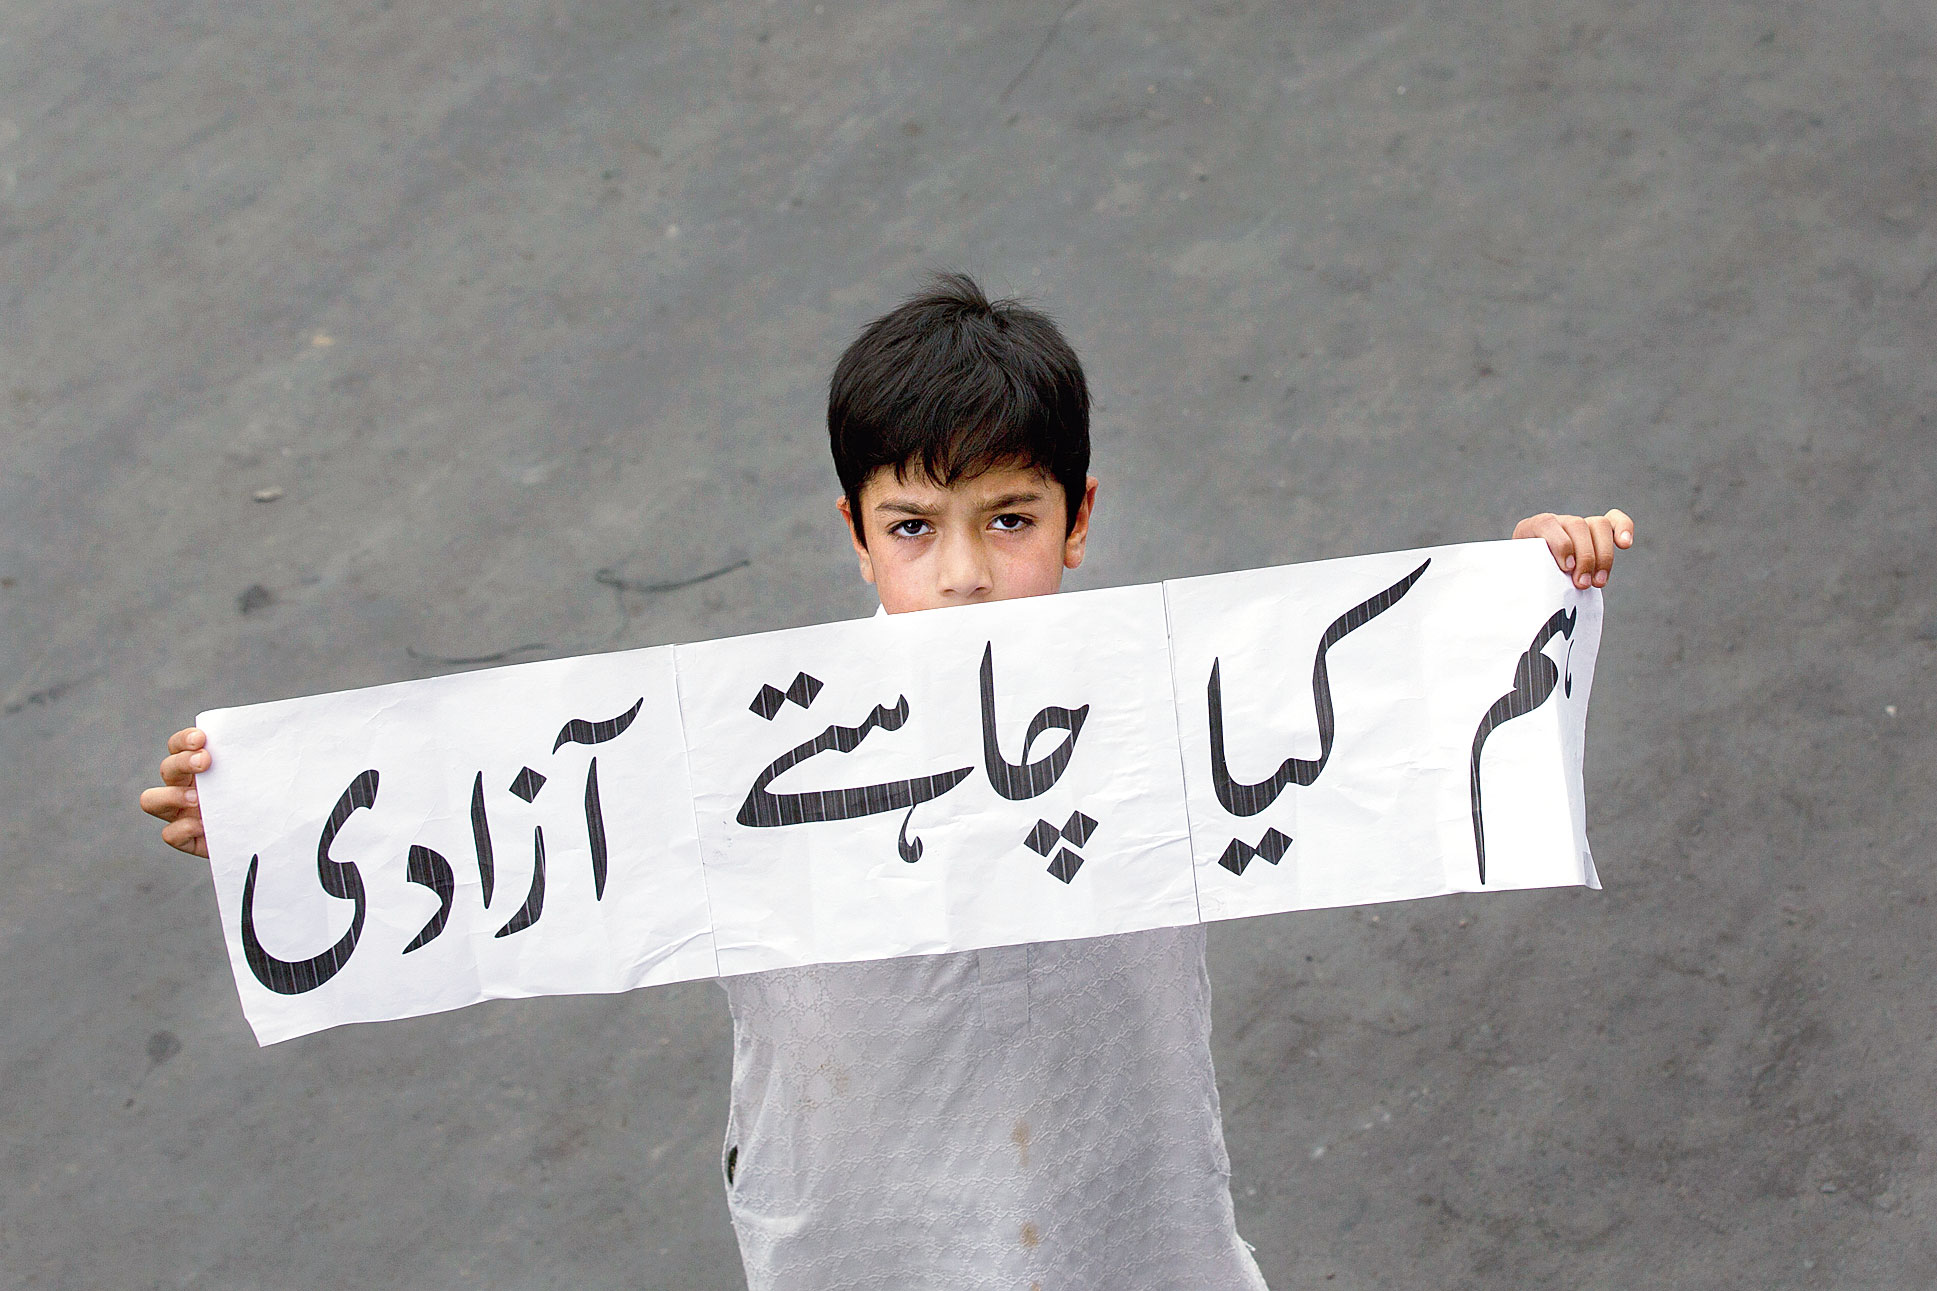 A Srinagar boy holds a banner that reads 'we want freedom'. The commission has also recommended to the US government targeted sanctions on Indian government agencies and officials responsible for severe violations of religious freedom by freezing their assets and/or barring their entry into the US.